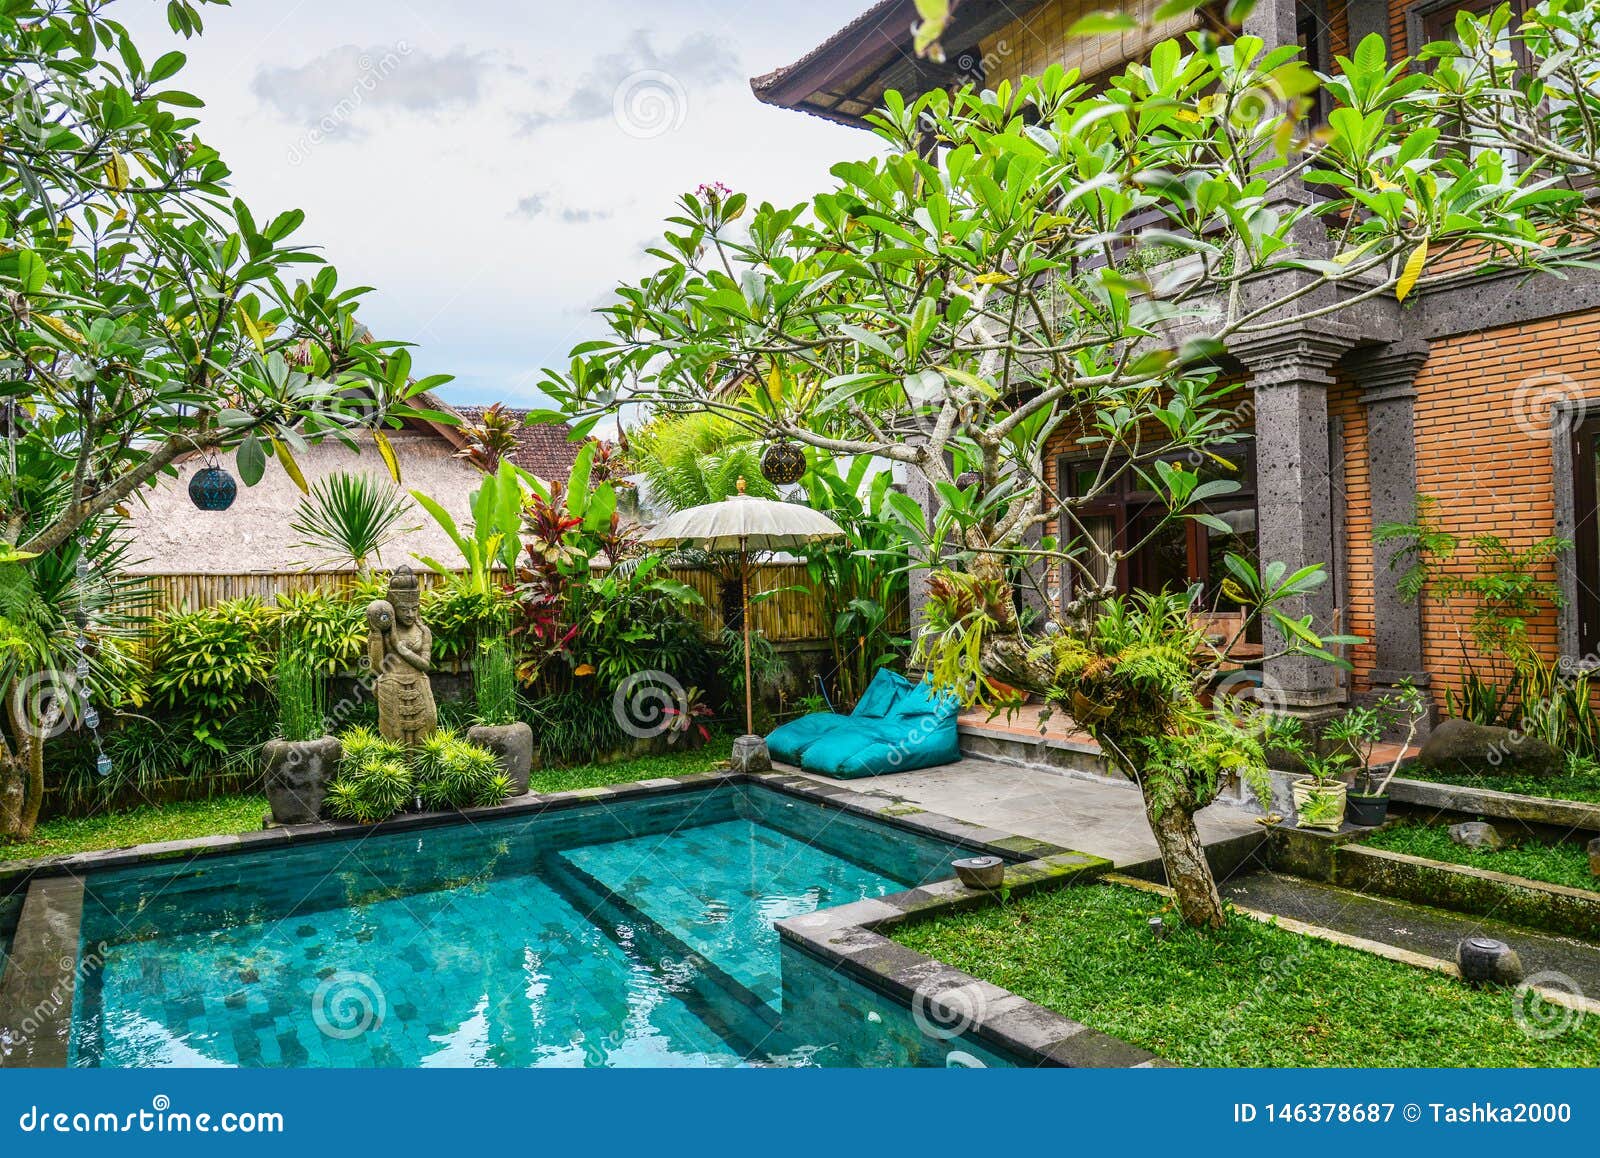 Garden On Back Yard With Swimming Pool Stock Image Image Of Asia Sunny 146378687